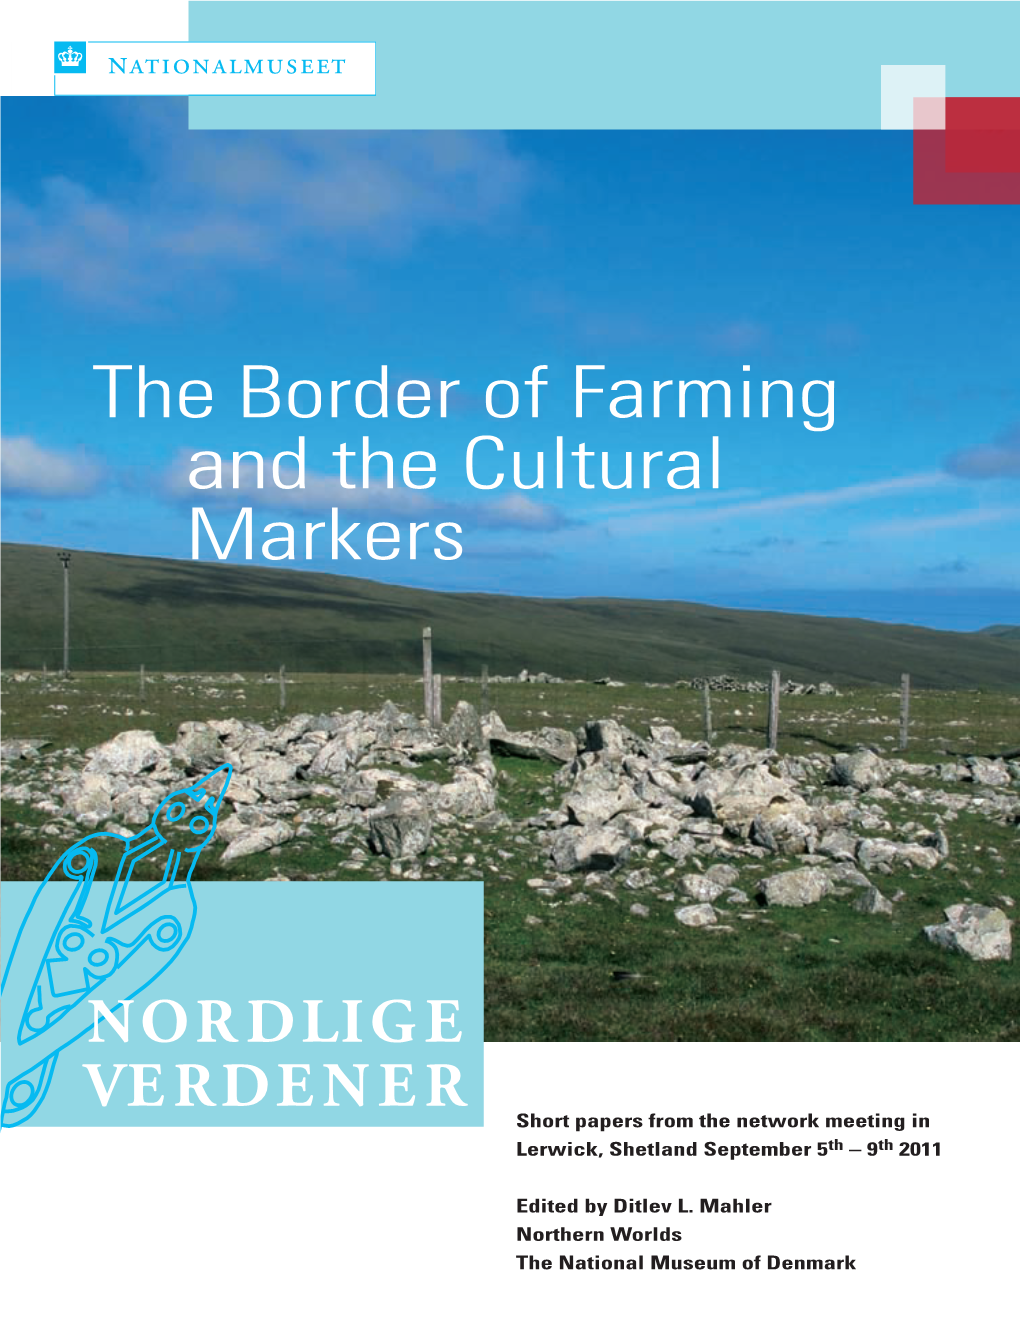 The Border of Farming and the Cultural Markers